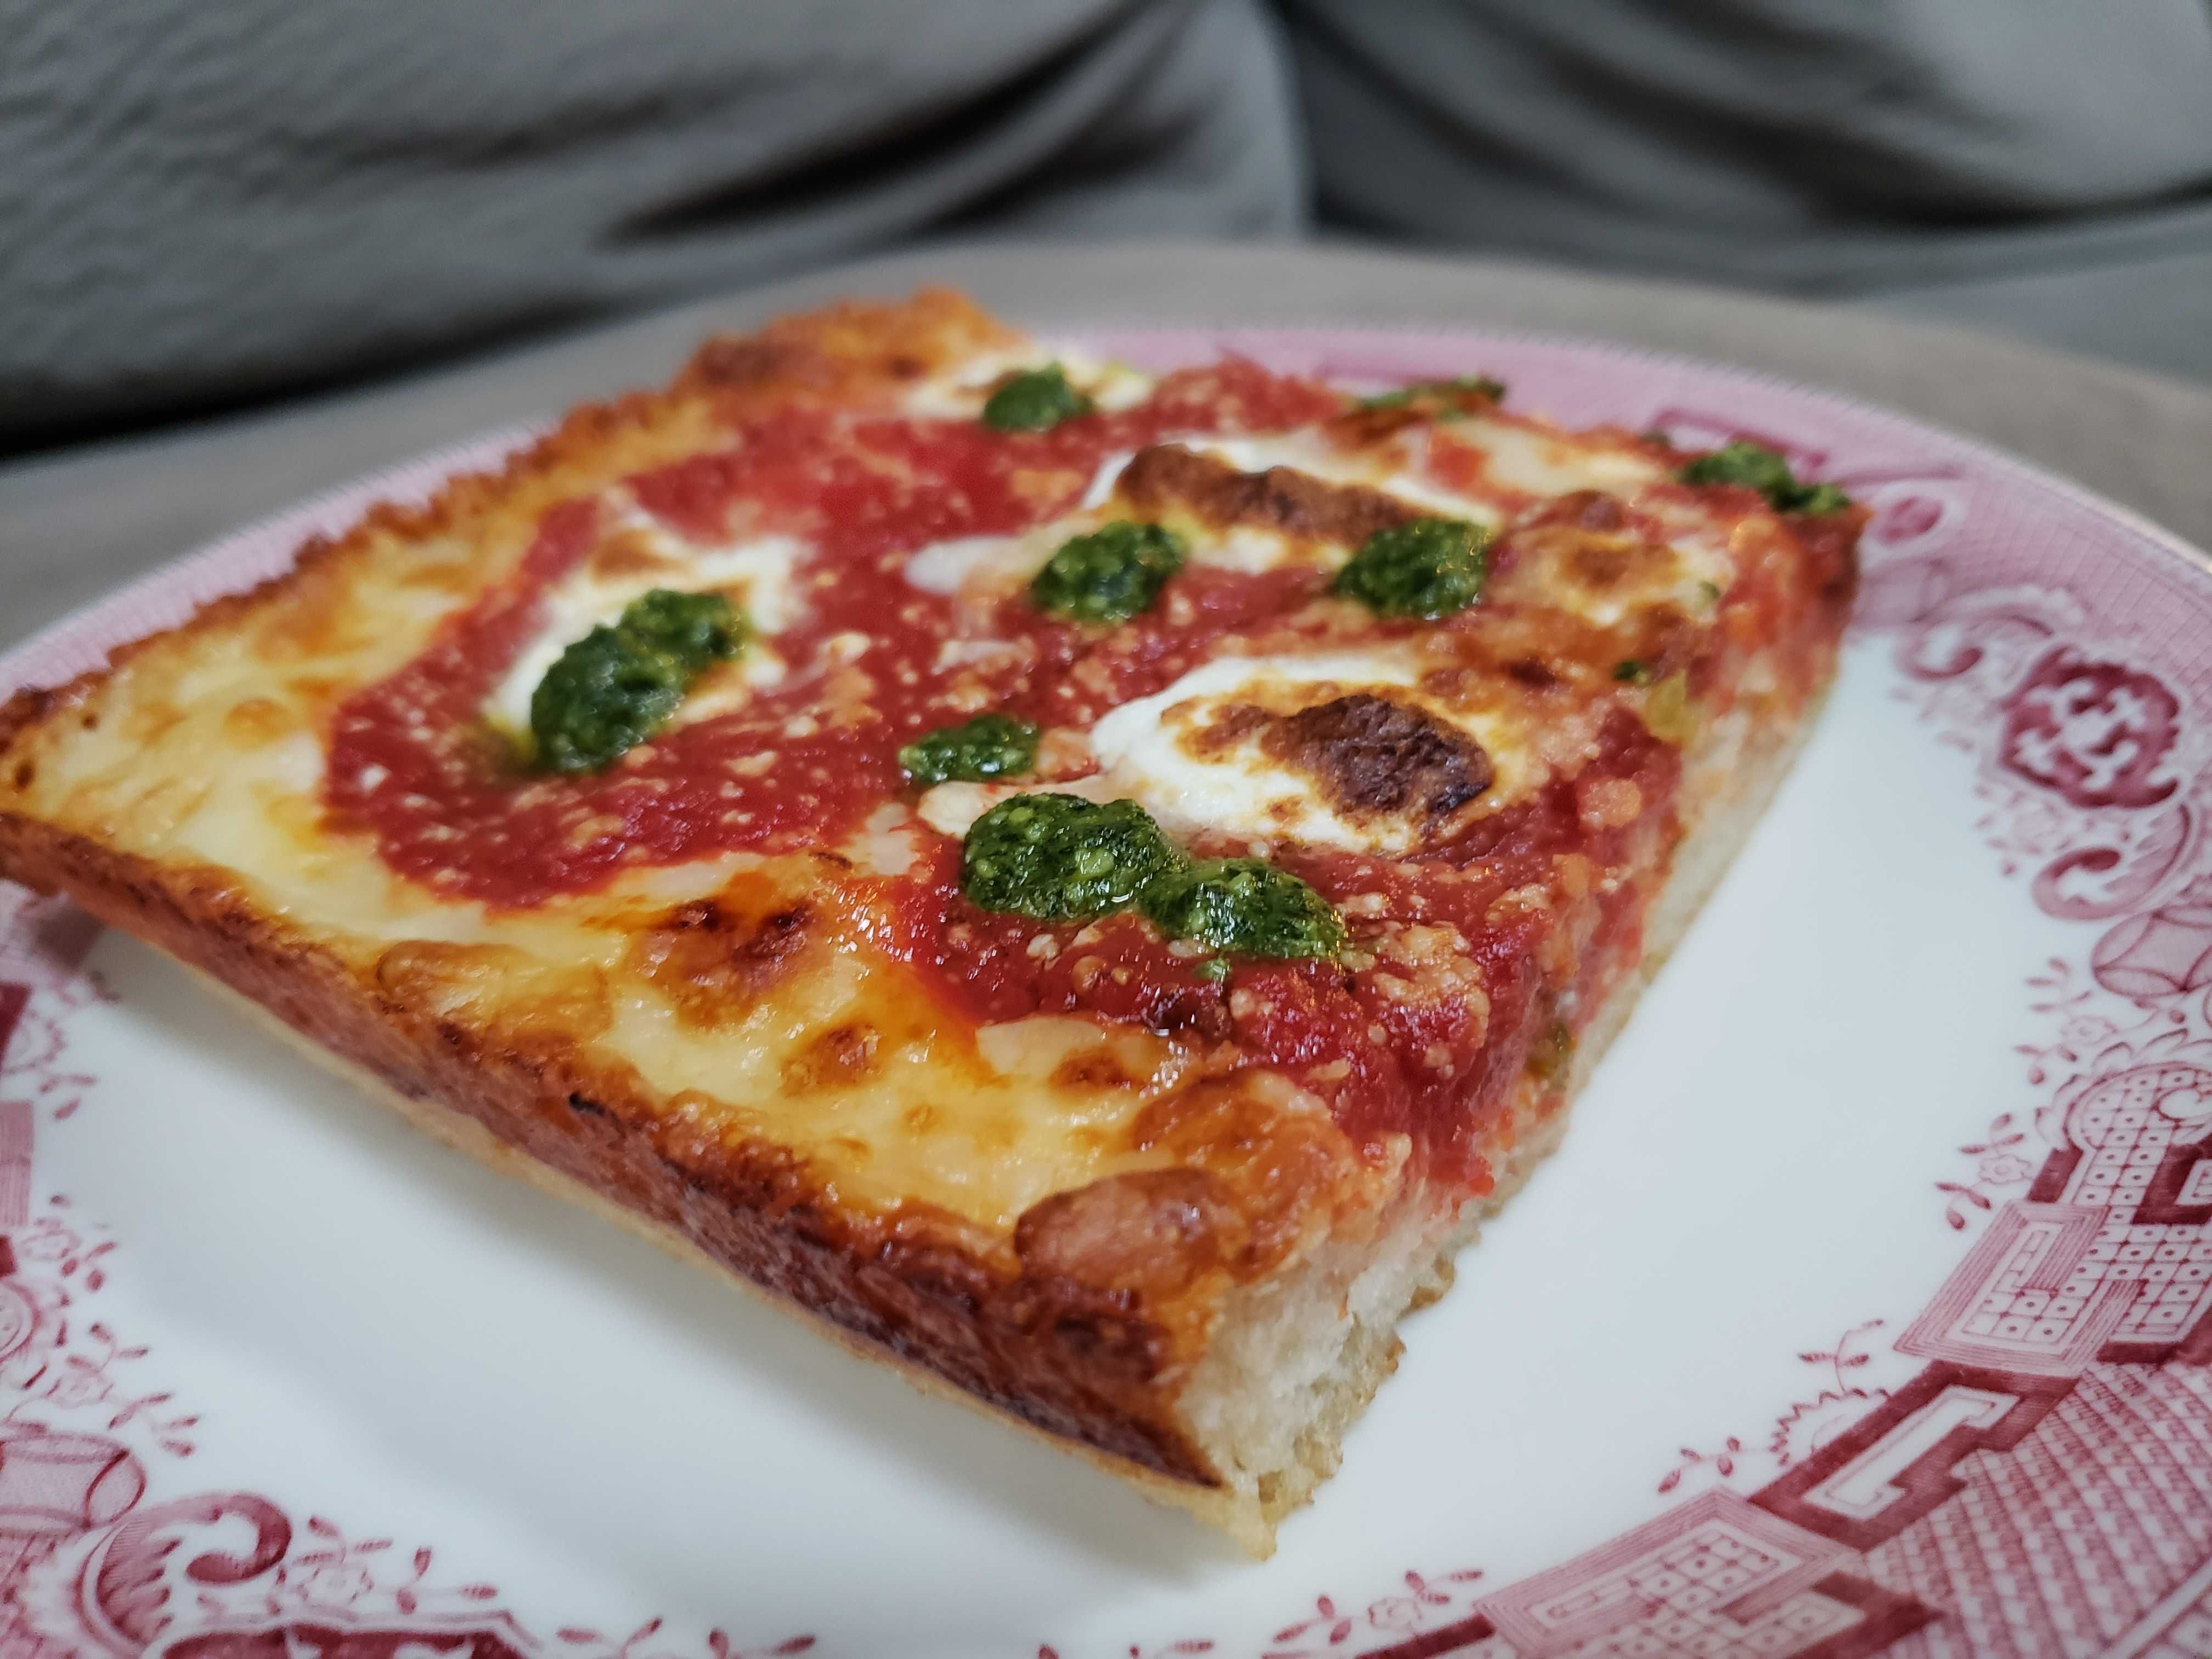 Photo of a piece of pizza 